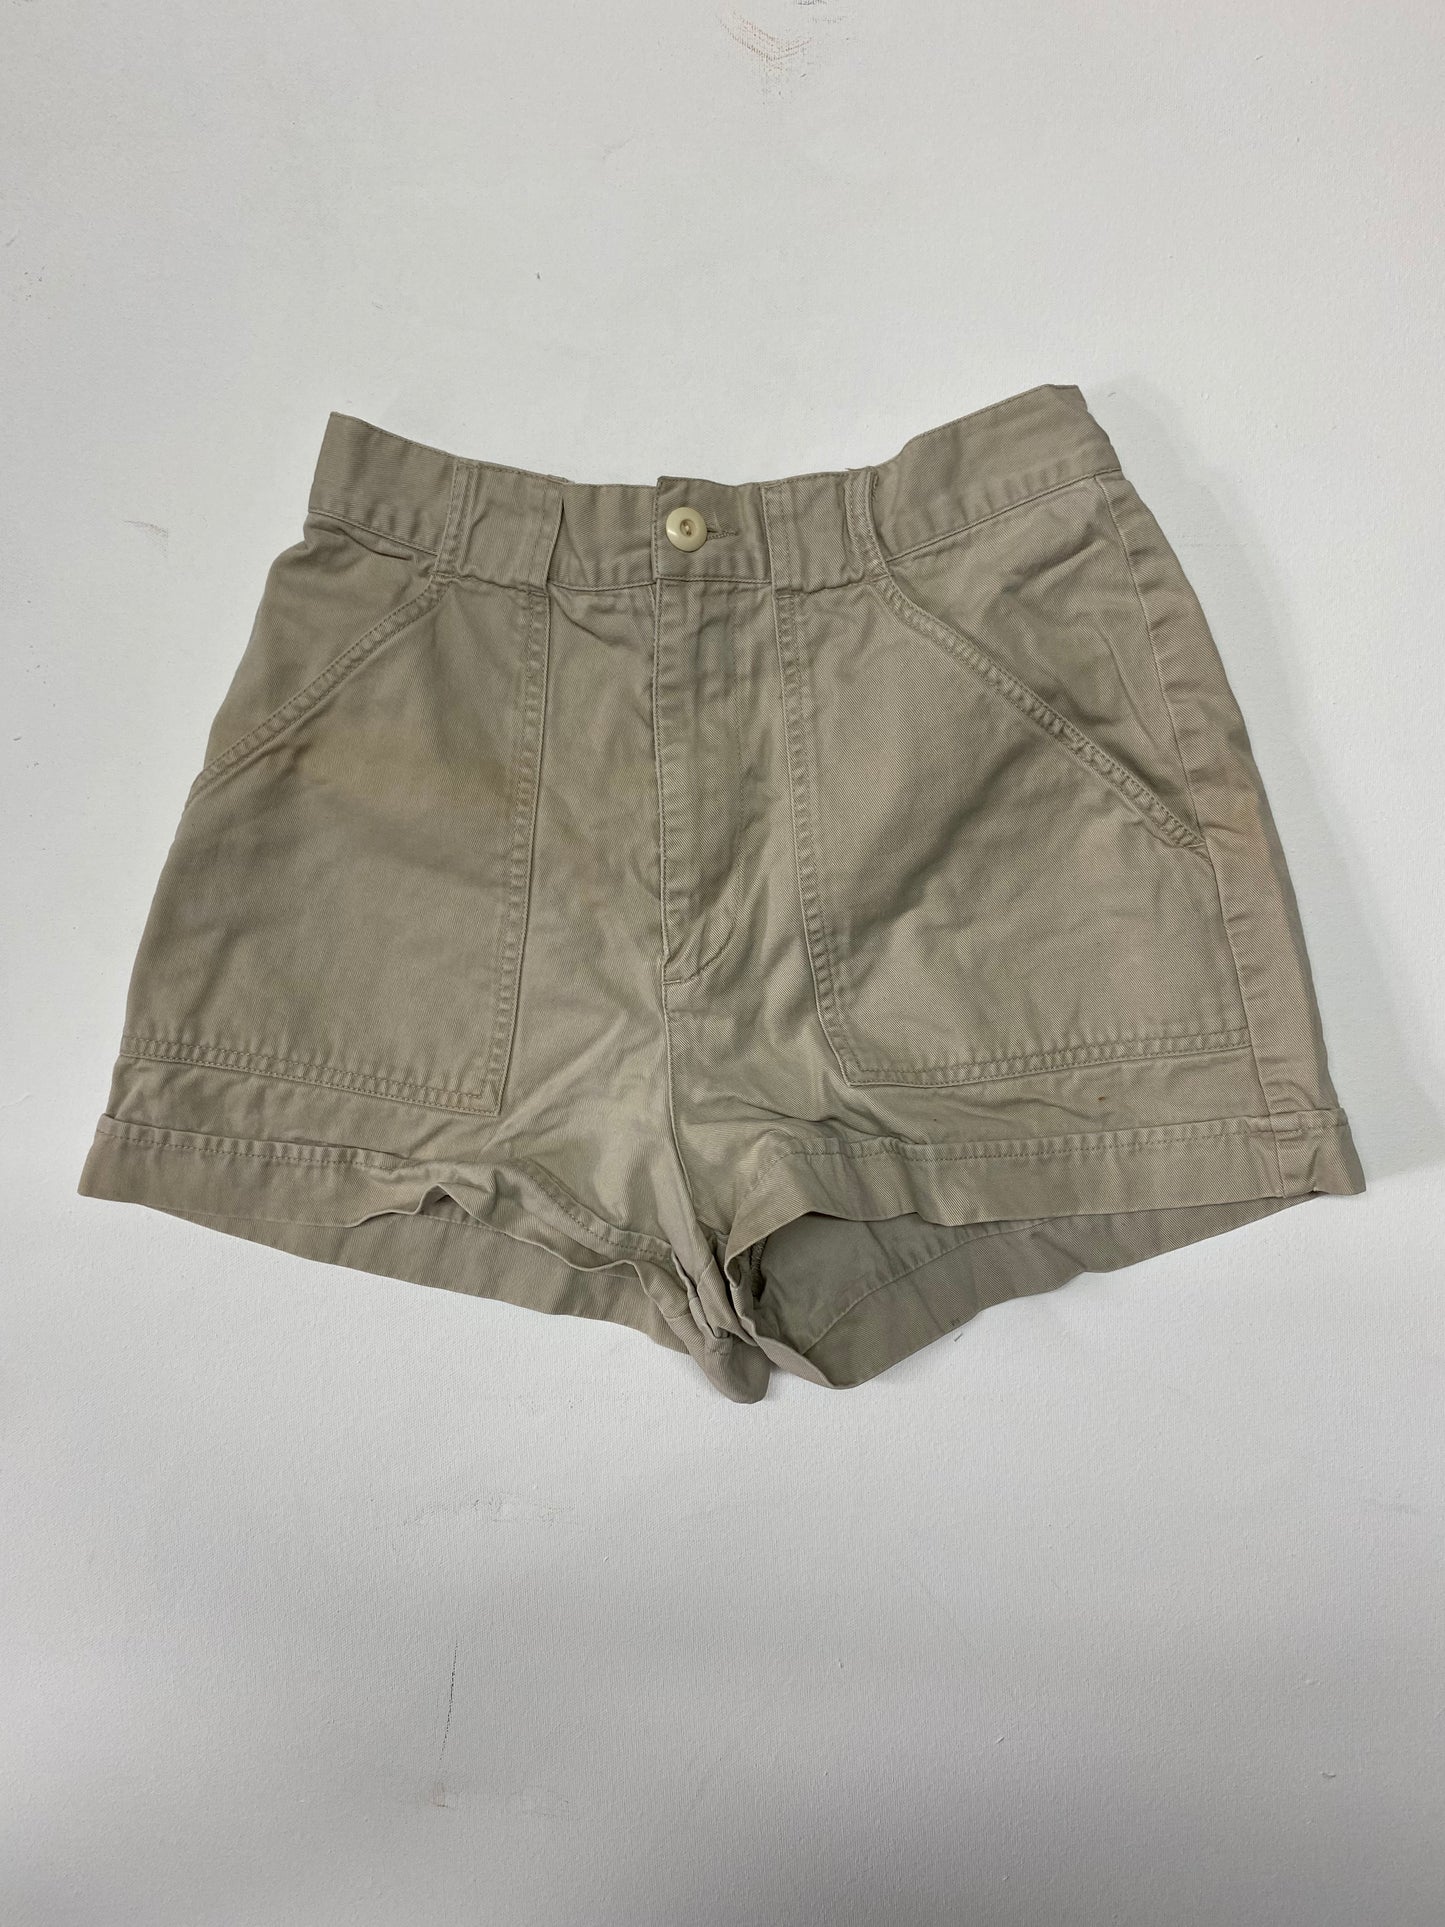 Abercrombie and Fitch Beige Cargo Shorts Size 6